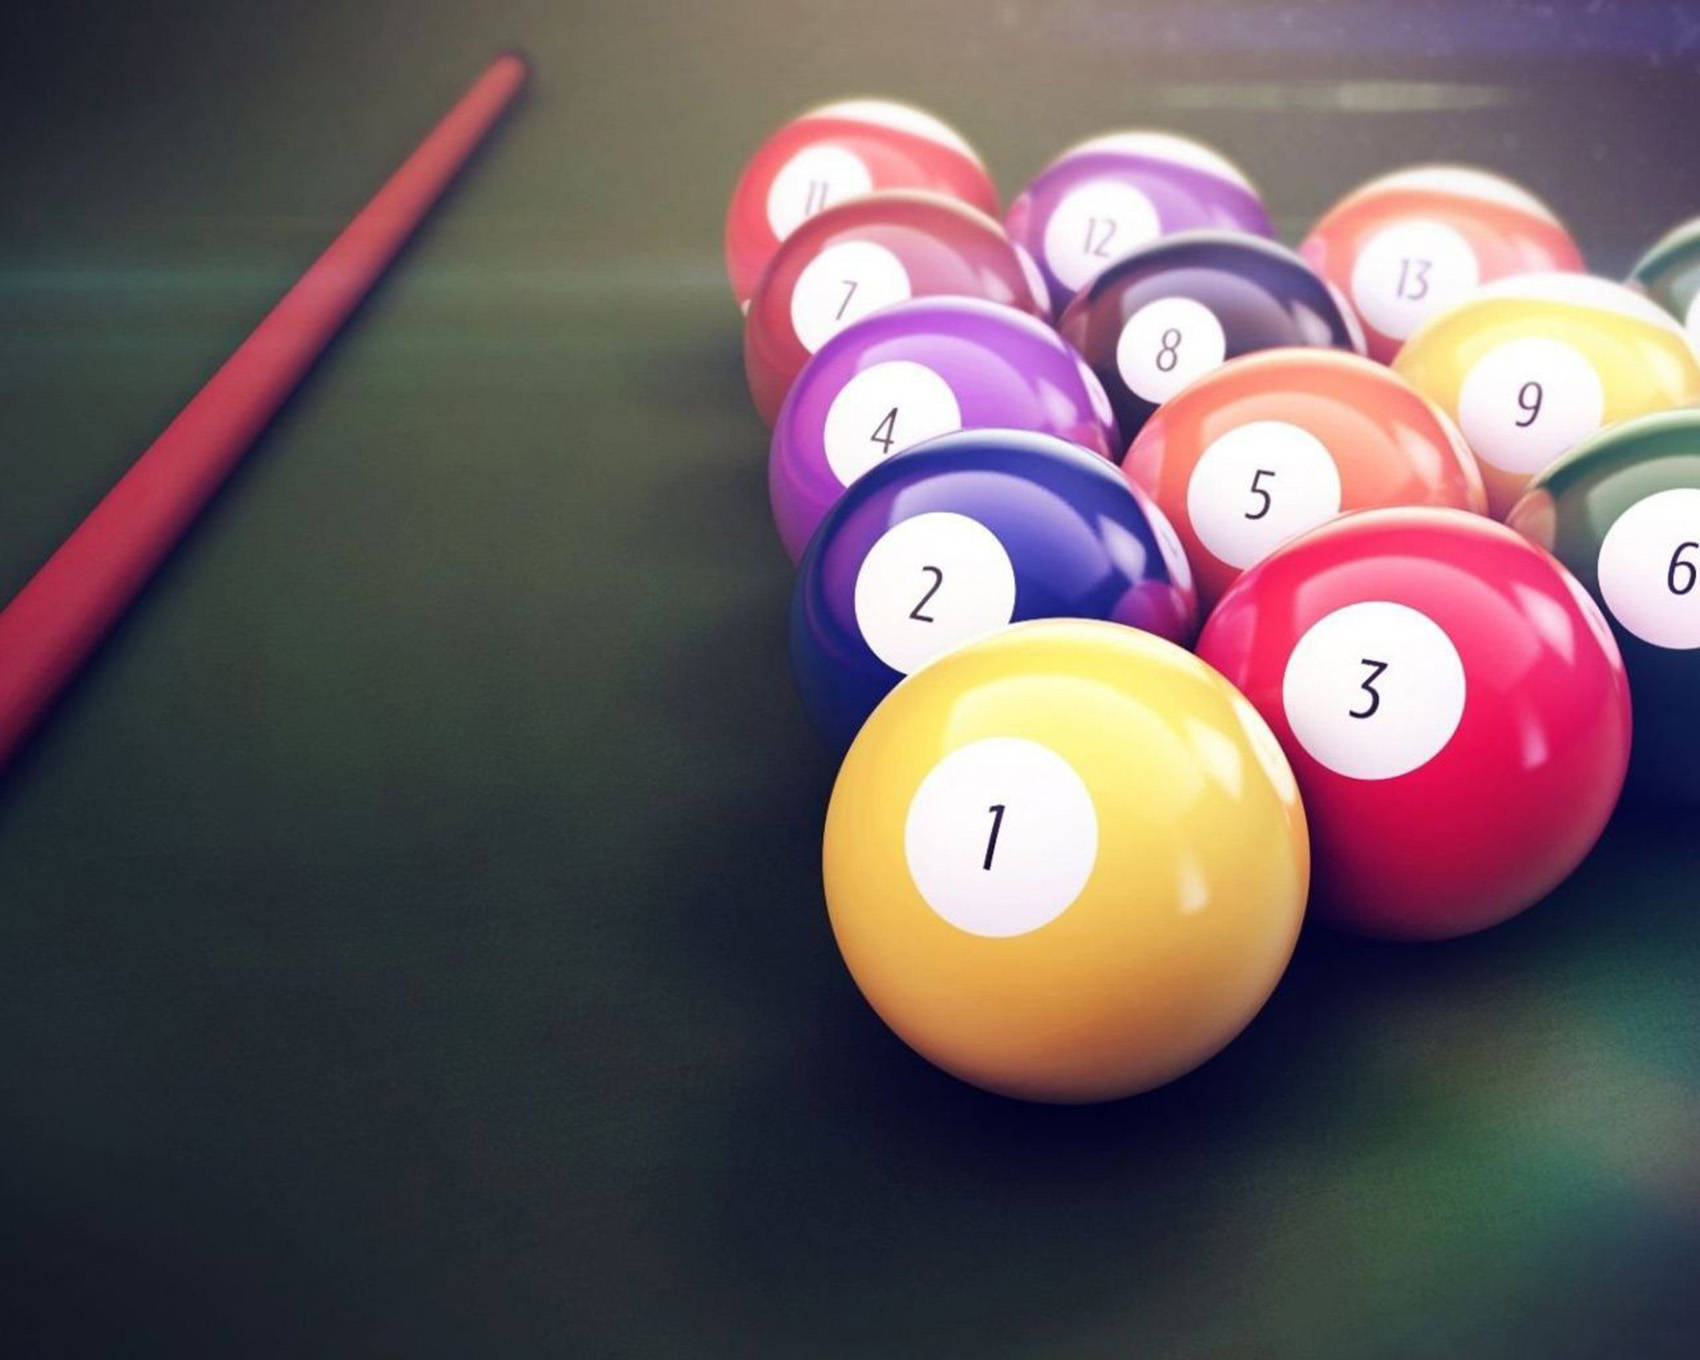 Snooker Game Play: Red Cue Stick And Snooker Balls Background